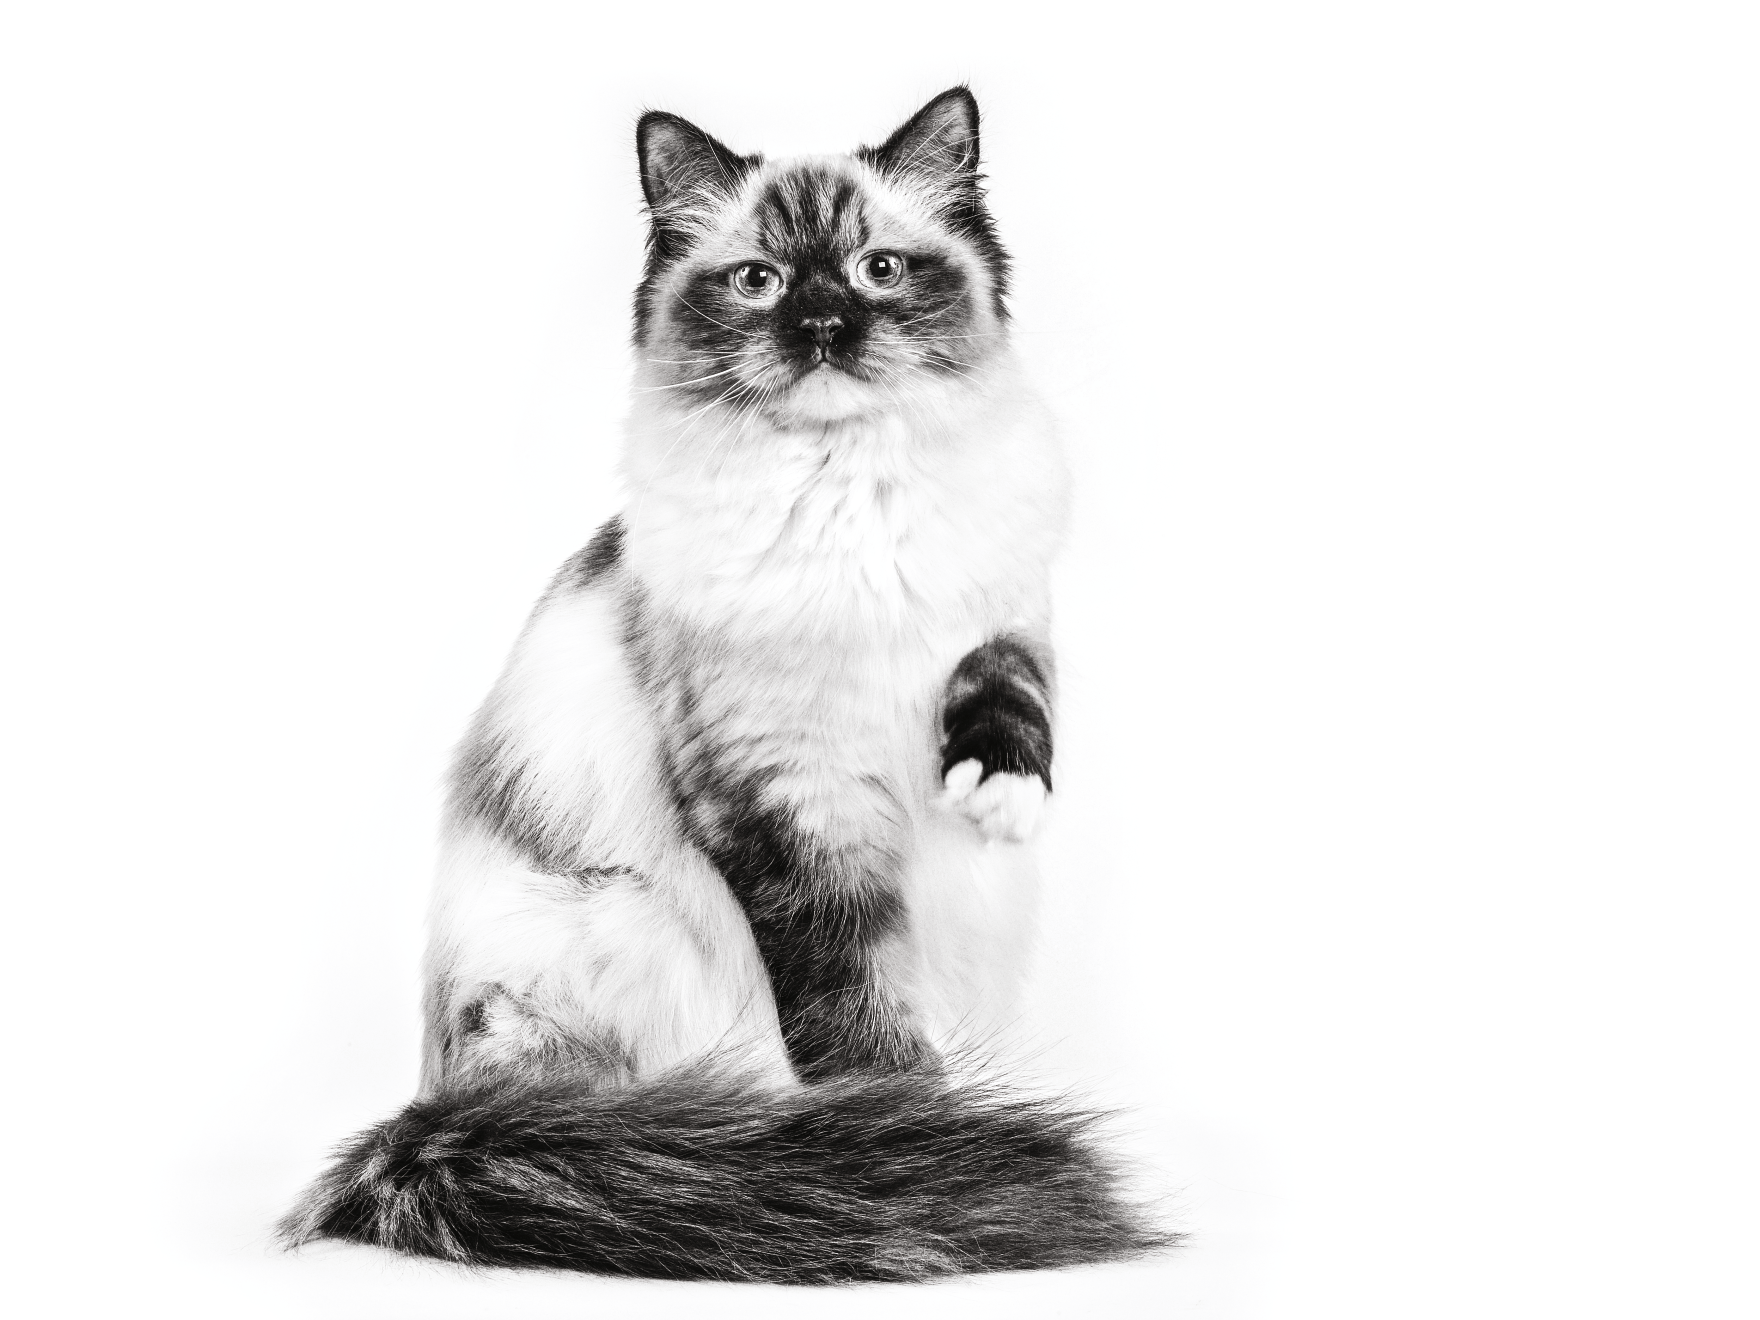 Black and white image of a Ragdoll cat sat holding one paw up